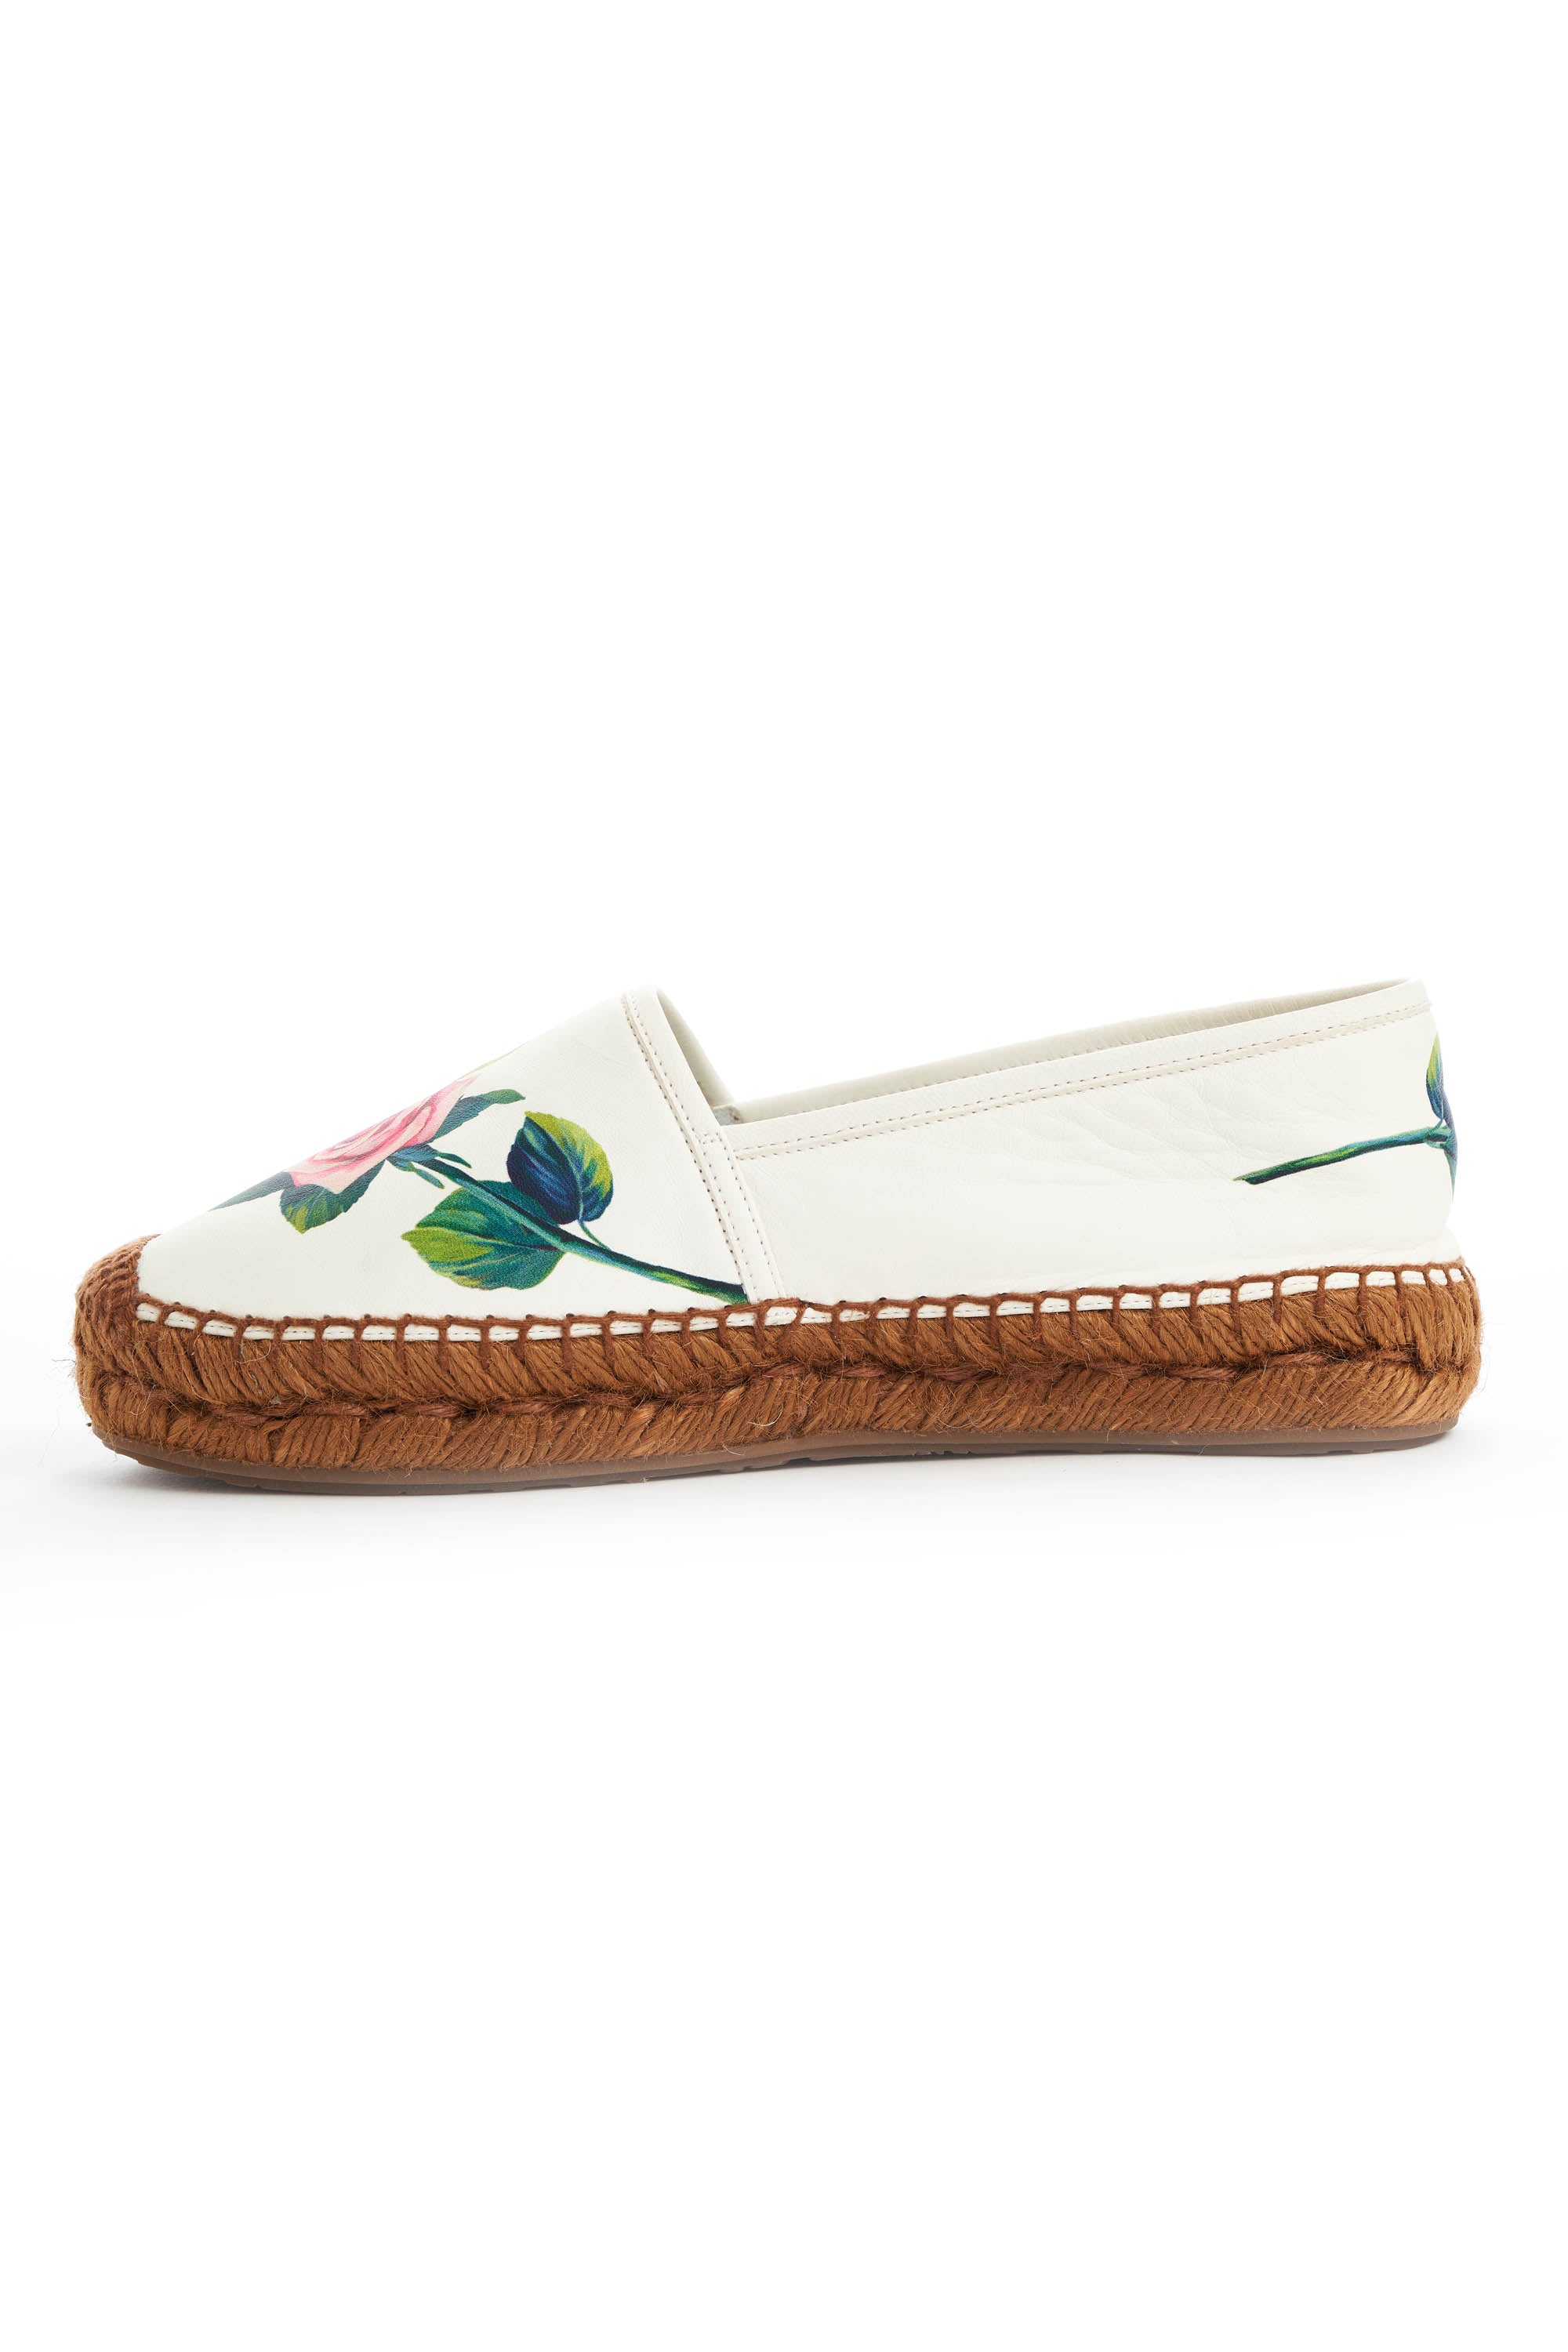 Dolce Gabbana White Espadrille with Printed Rose Size 39